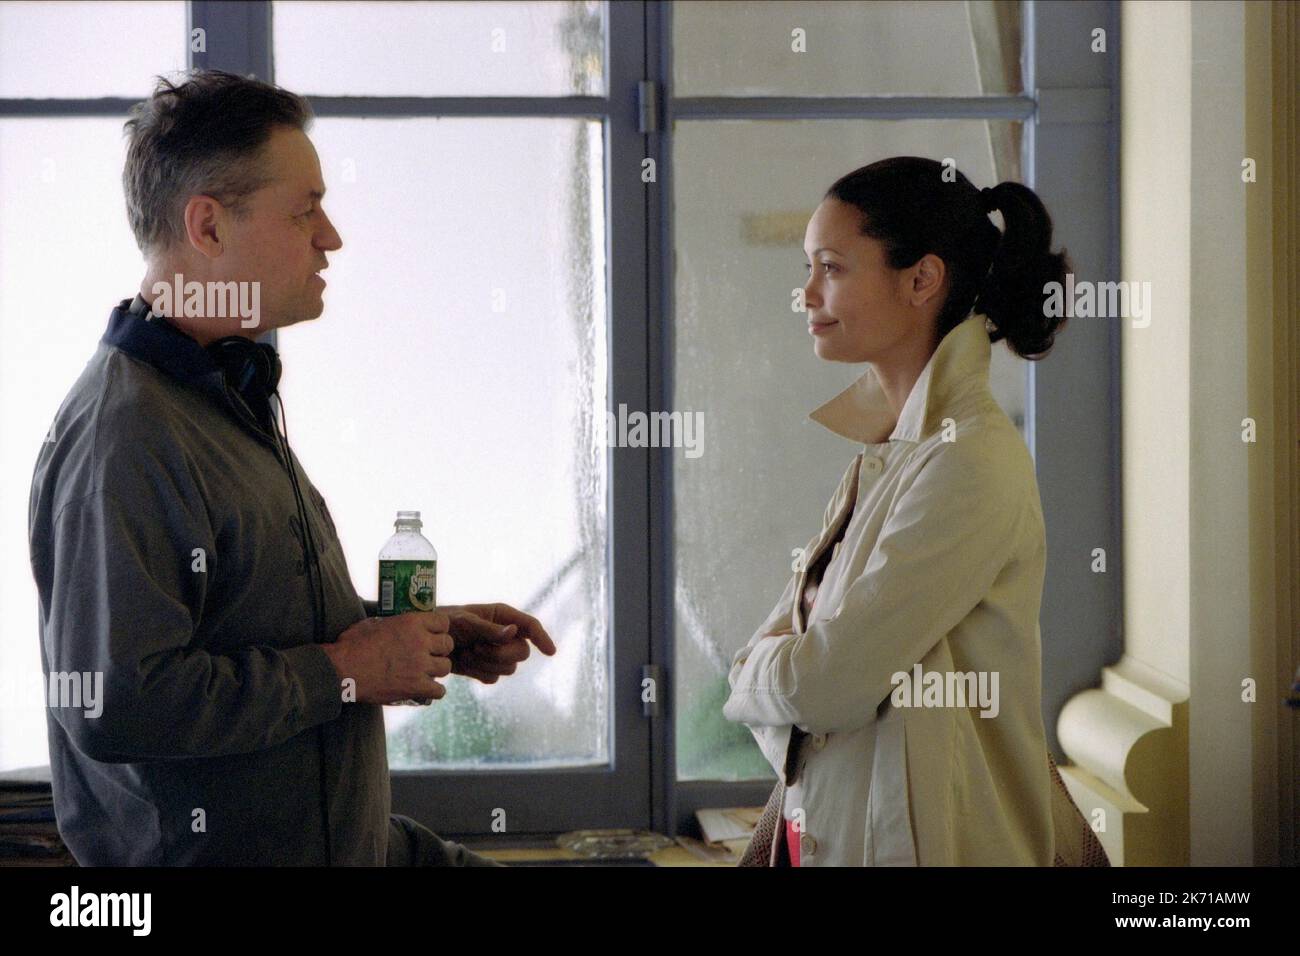 JONATHAN DEMME, THANDIE NEWTON, THE TRUTH ABOUT CHARLIE, 2002 Stock Photo